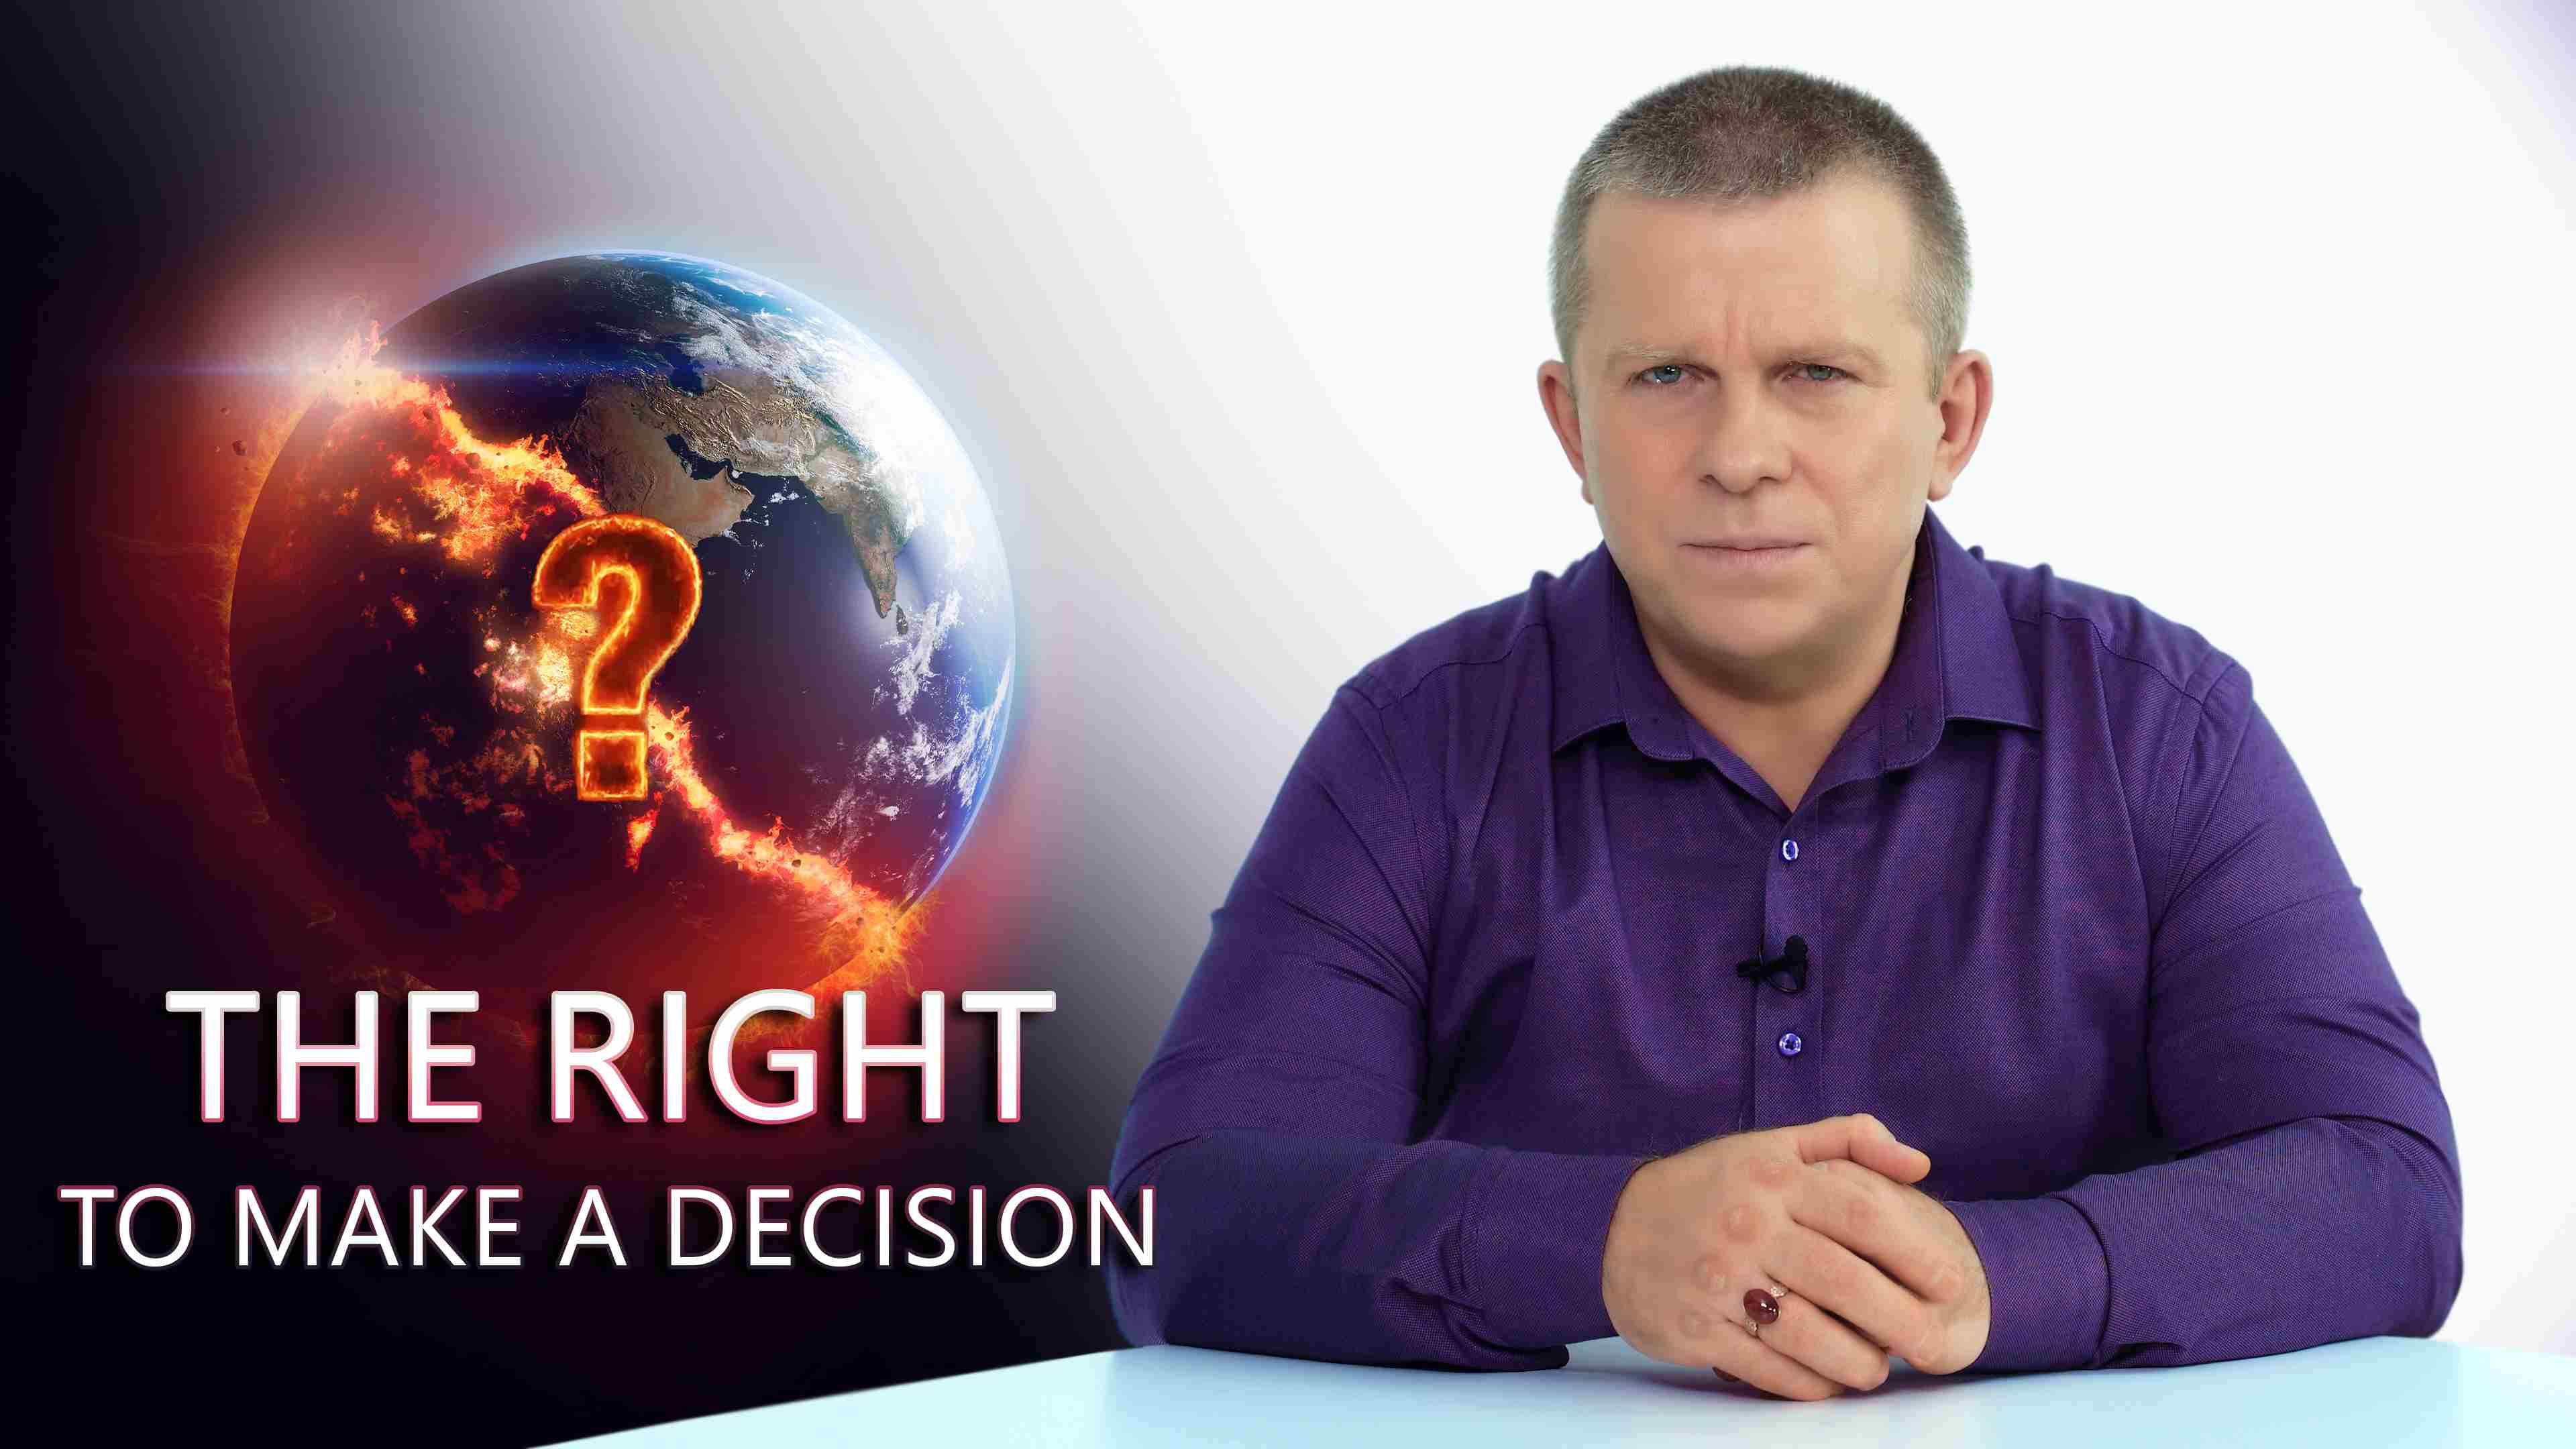 The Right to Make a Decision